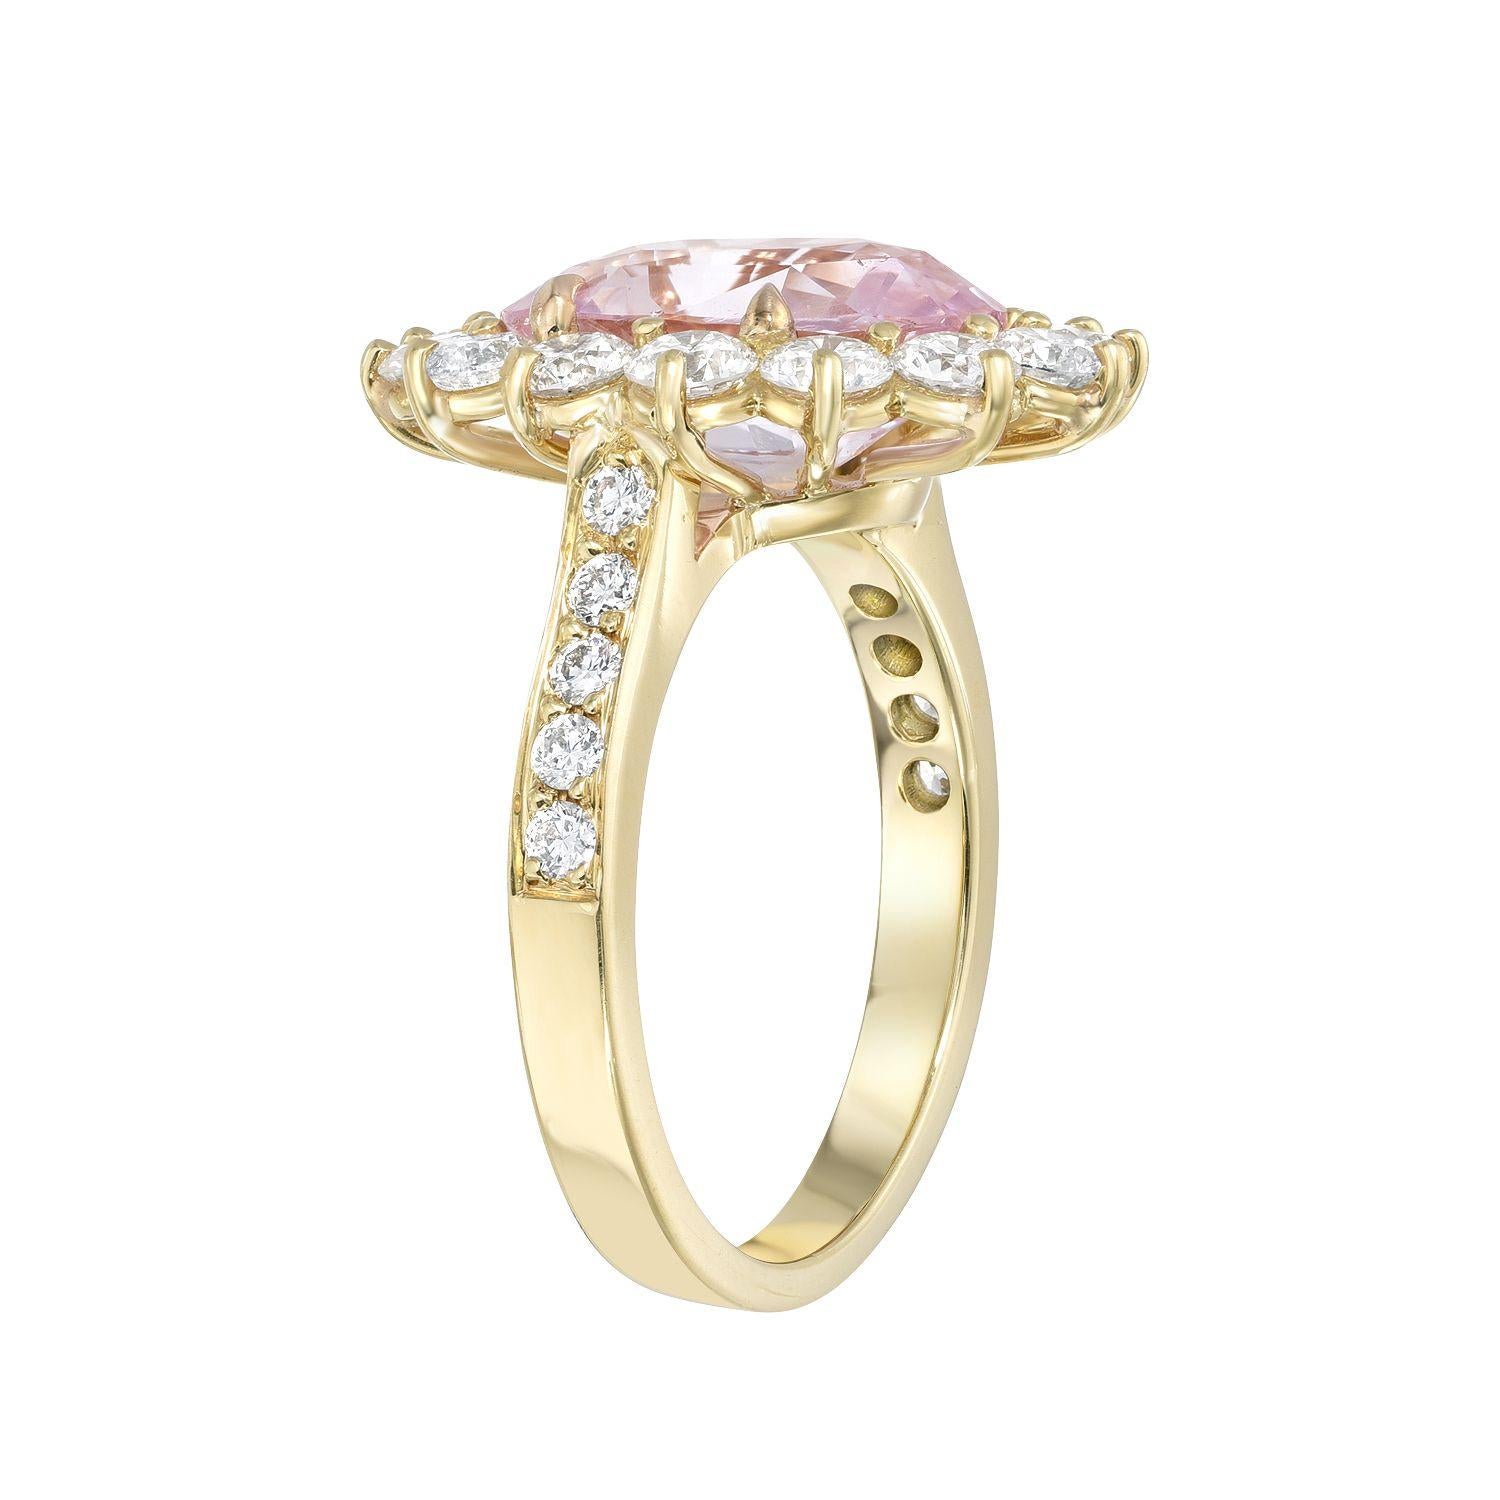 Marvelous 4.47 carat pastel Pink Sapphire, 18K yellow gold ring, surrounded by diamonds weighing a total of 1.61 carats.
Size 6.5. Resizing is complementary upon request.
Returns are accepted and paid by us within 7 days of delivery.

Sapphire is